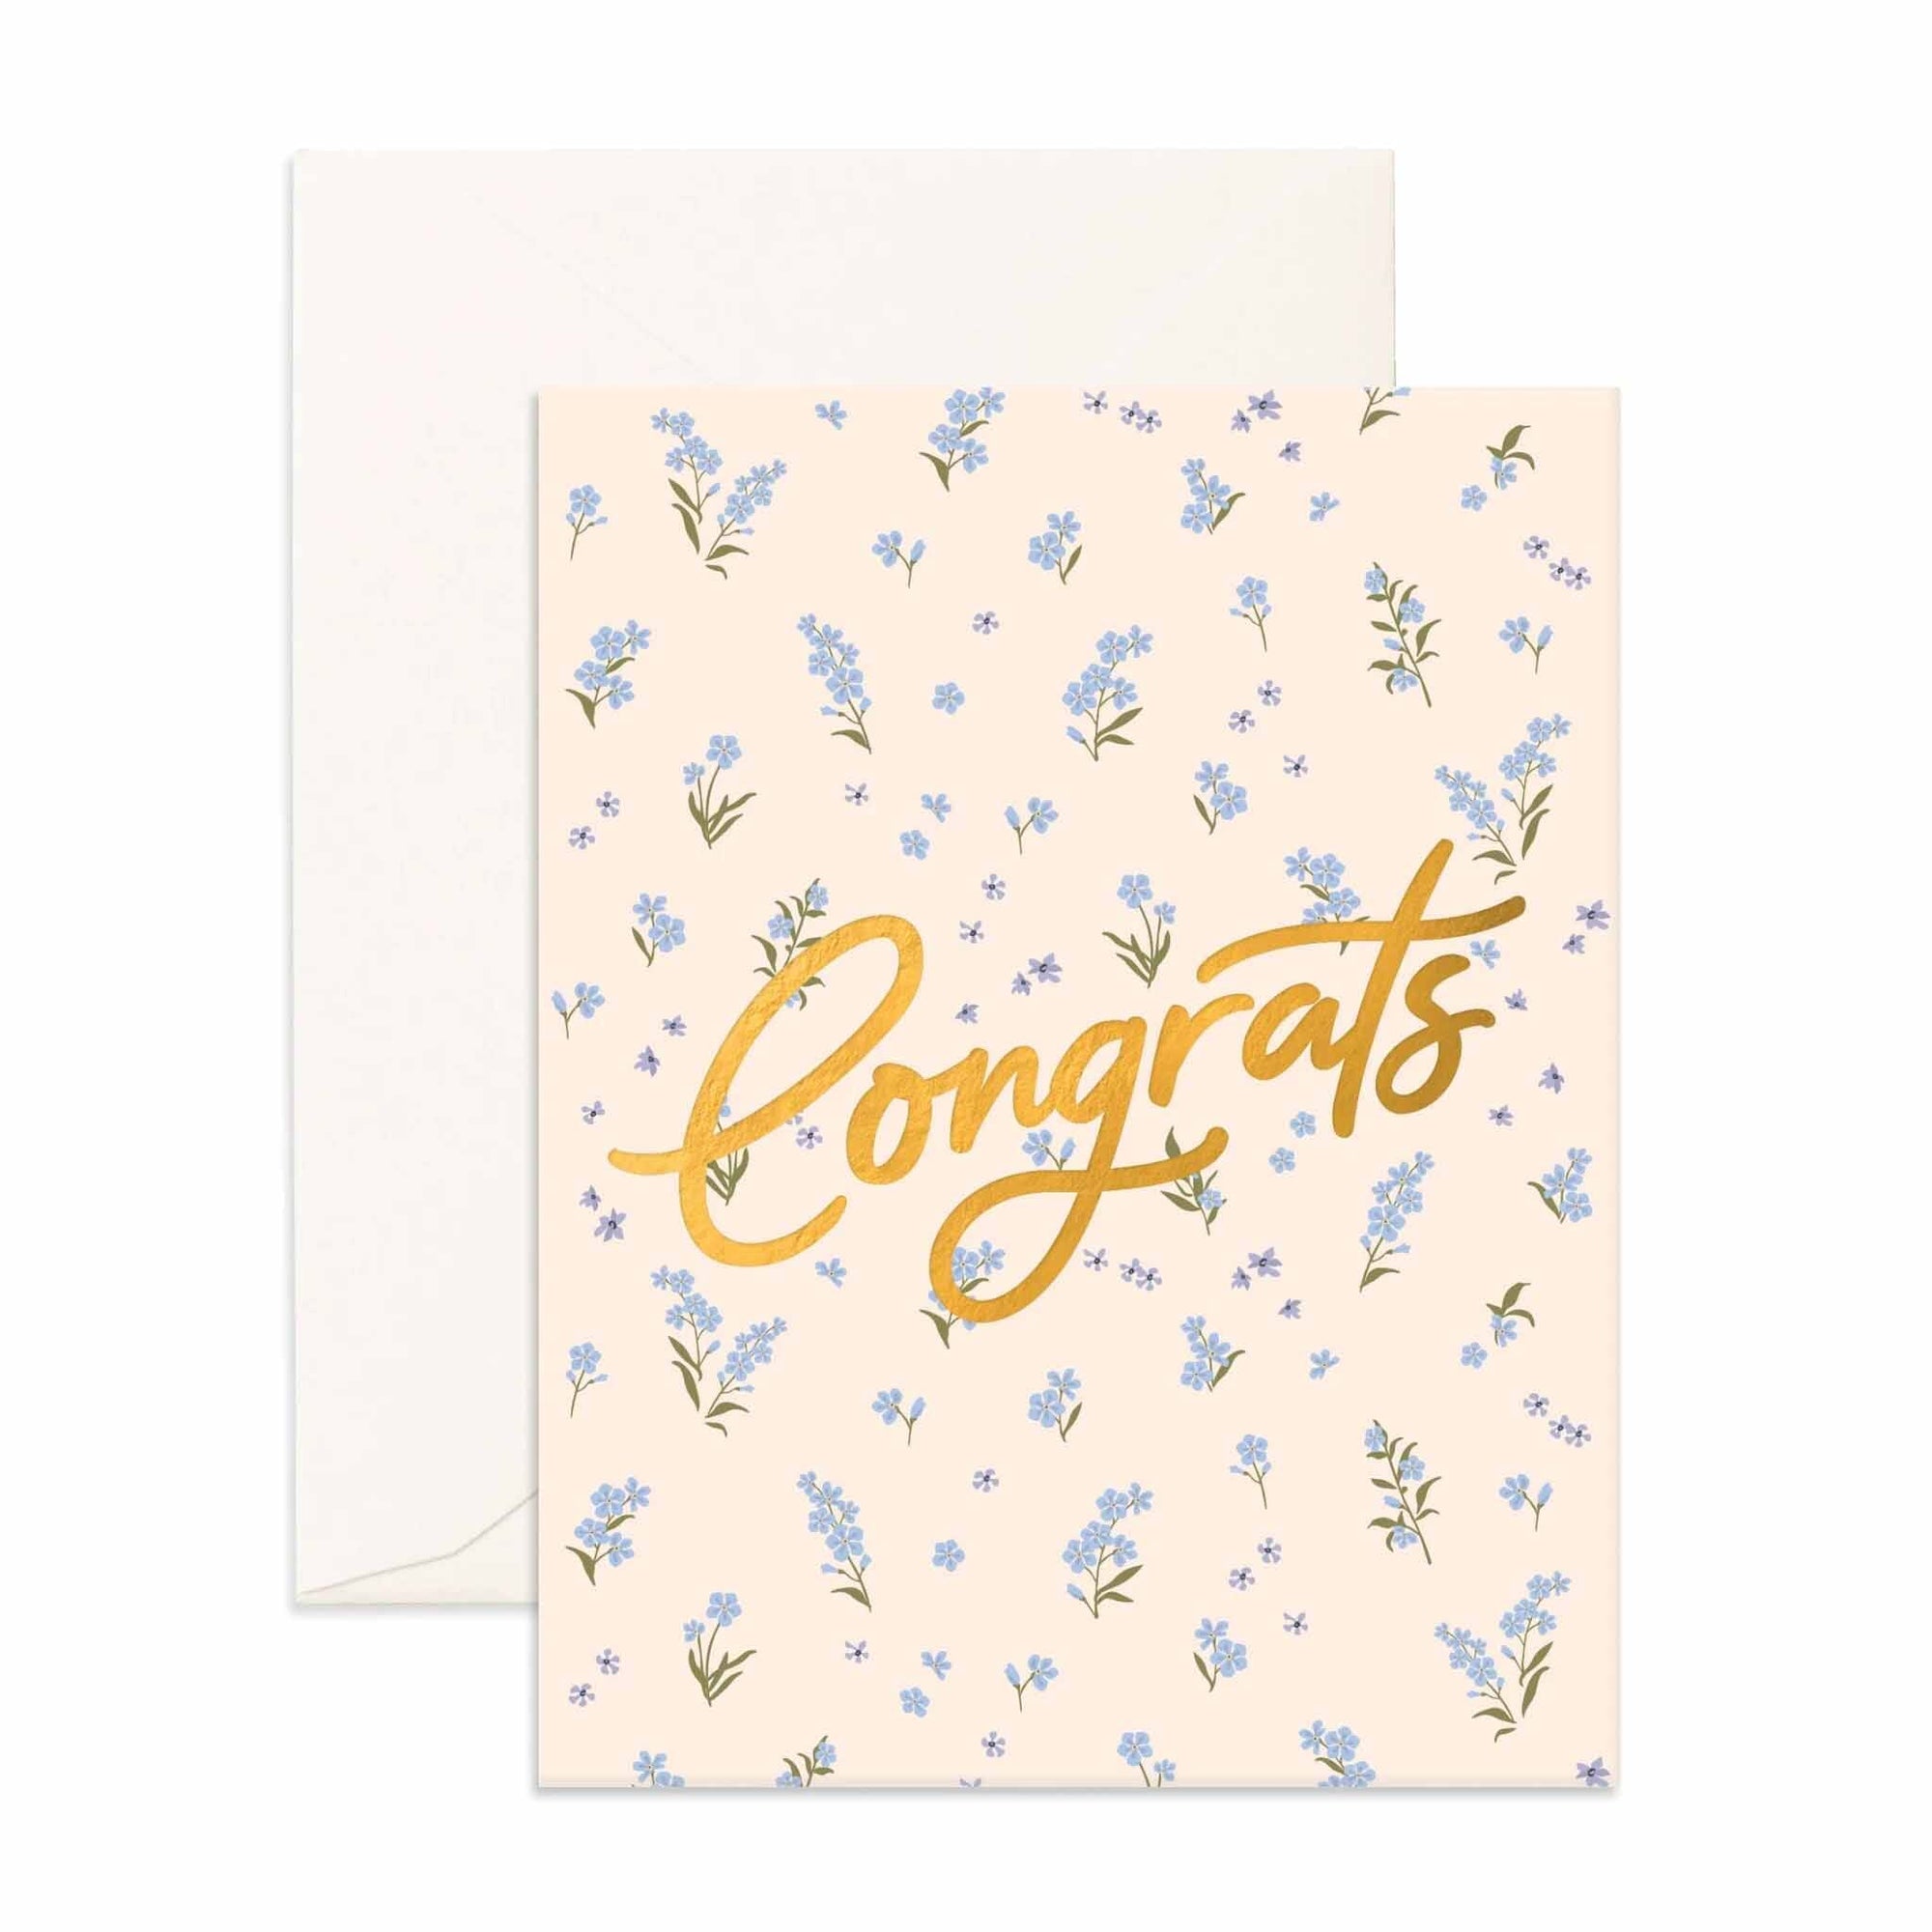 Congrats Forget Me Not Greeting Card